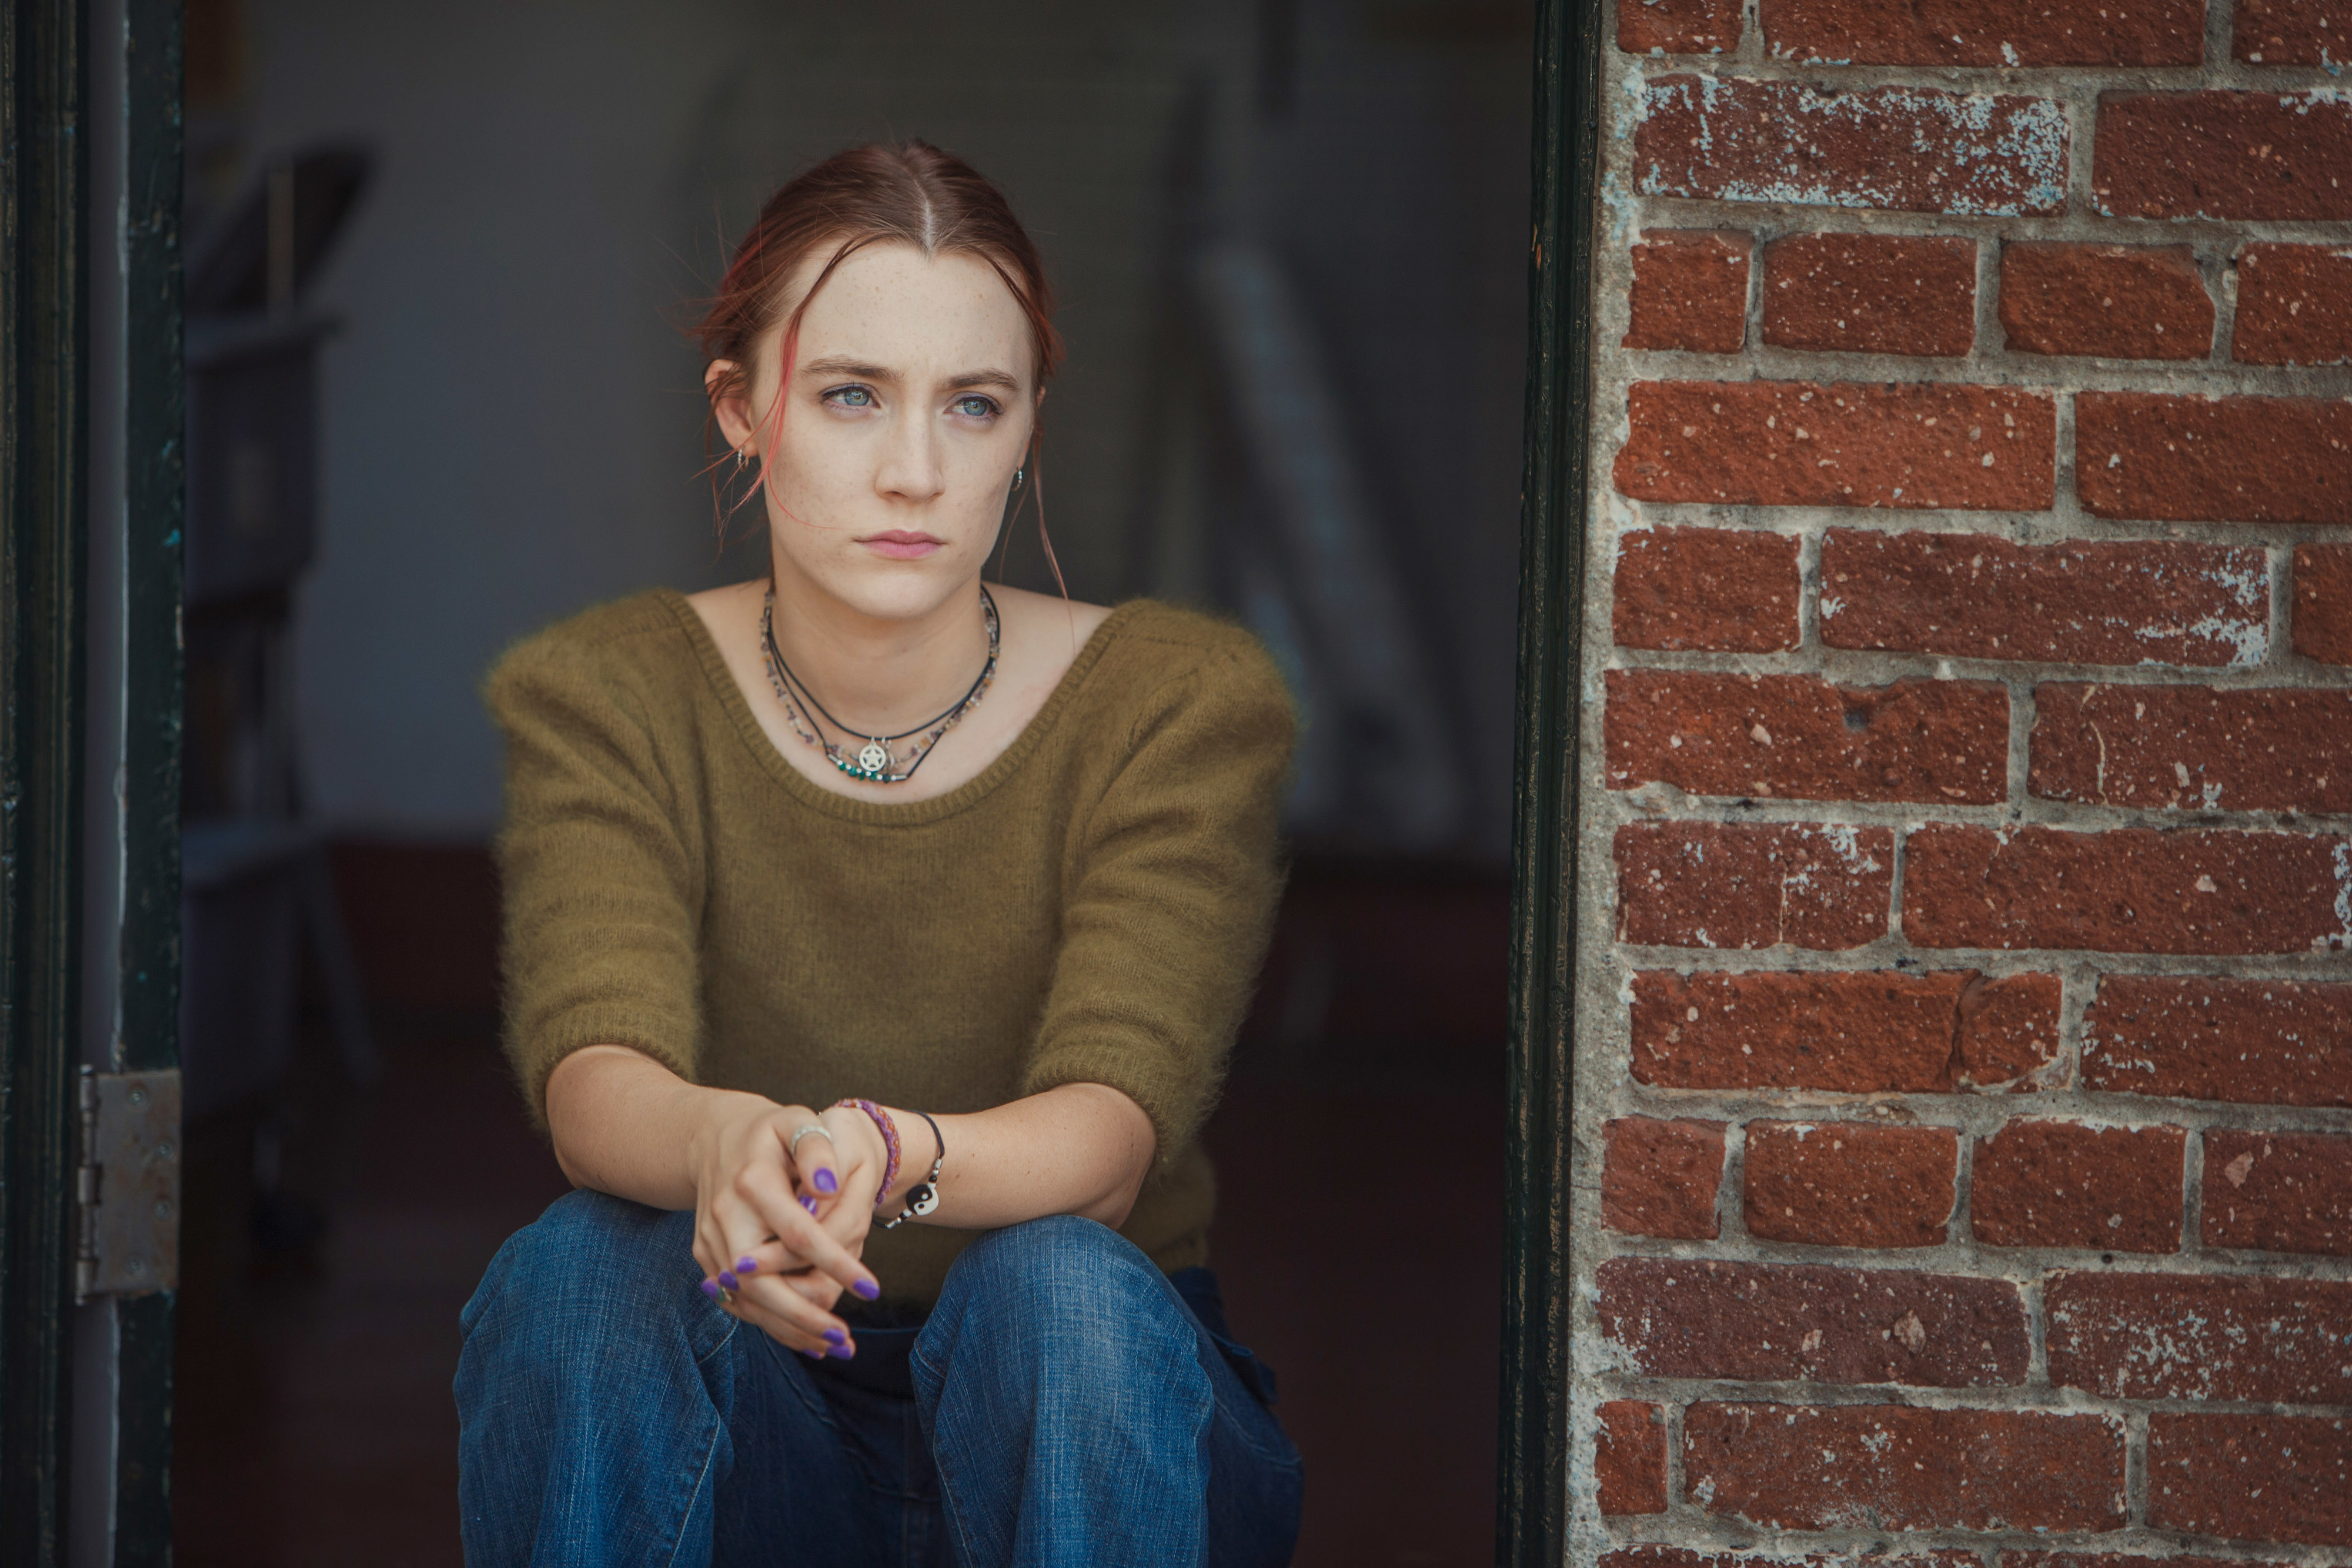 Lady Bird sitting by a window, looking pensive, wearing a sweater and a necklace